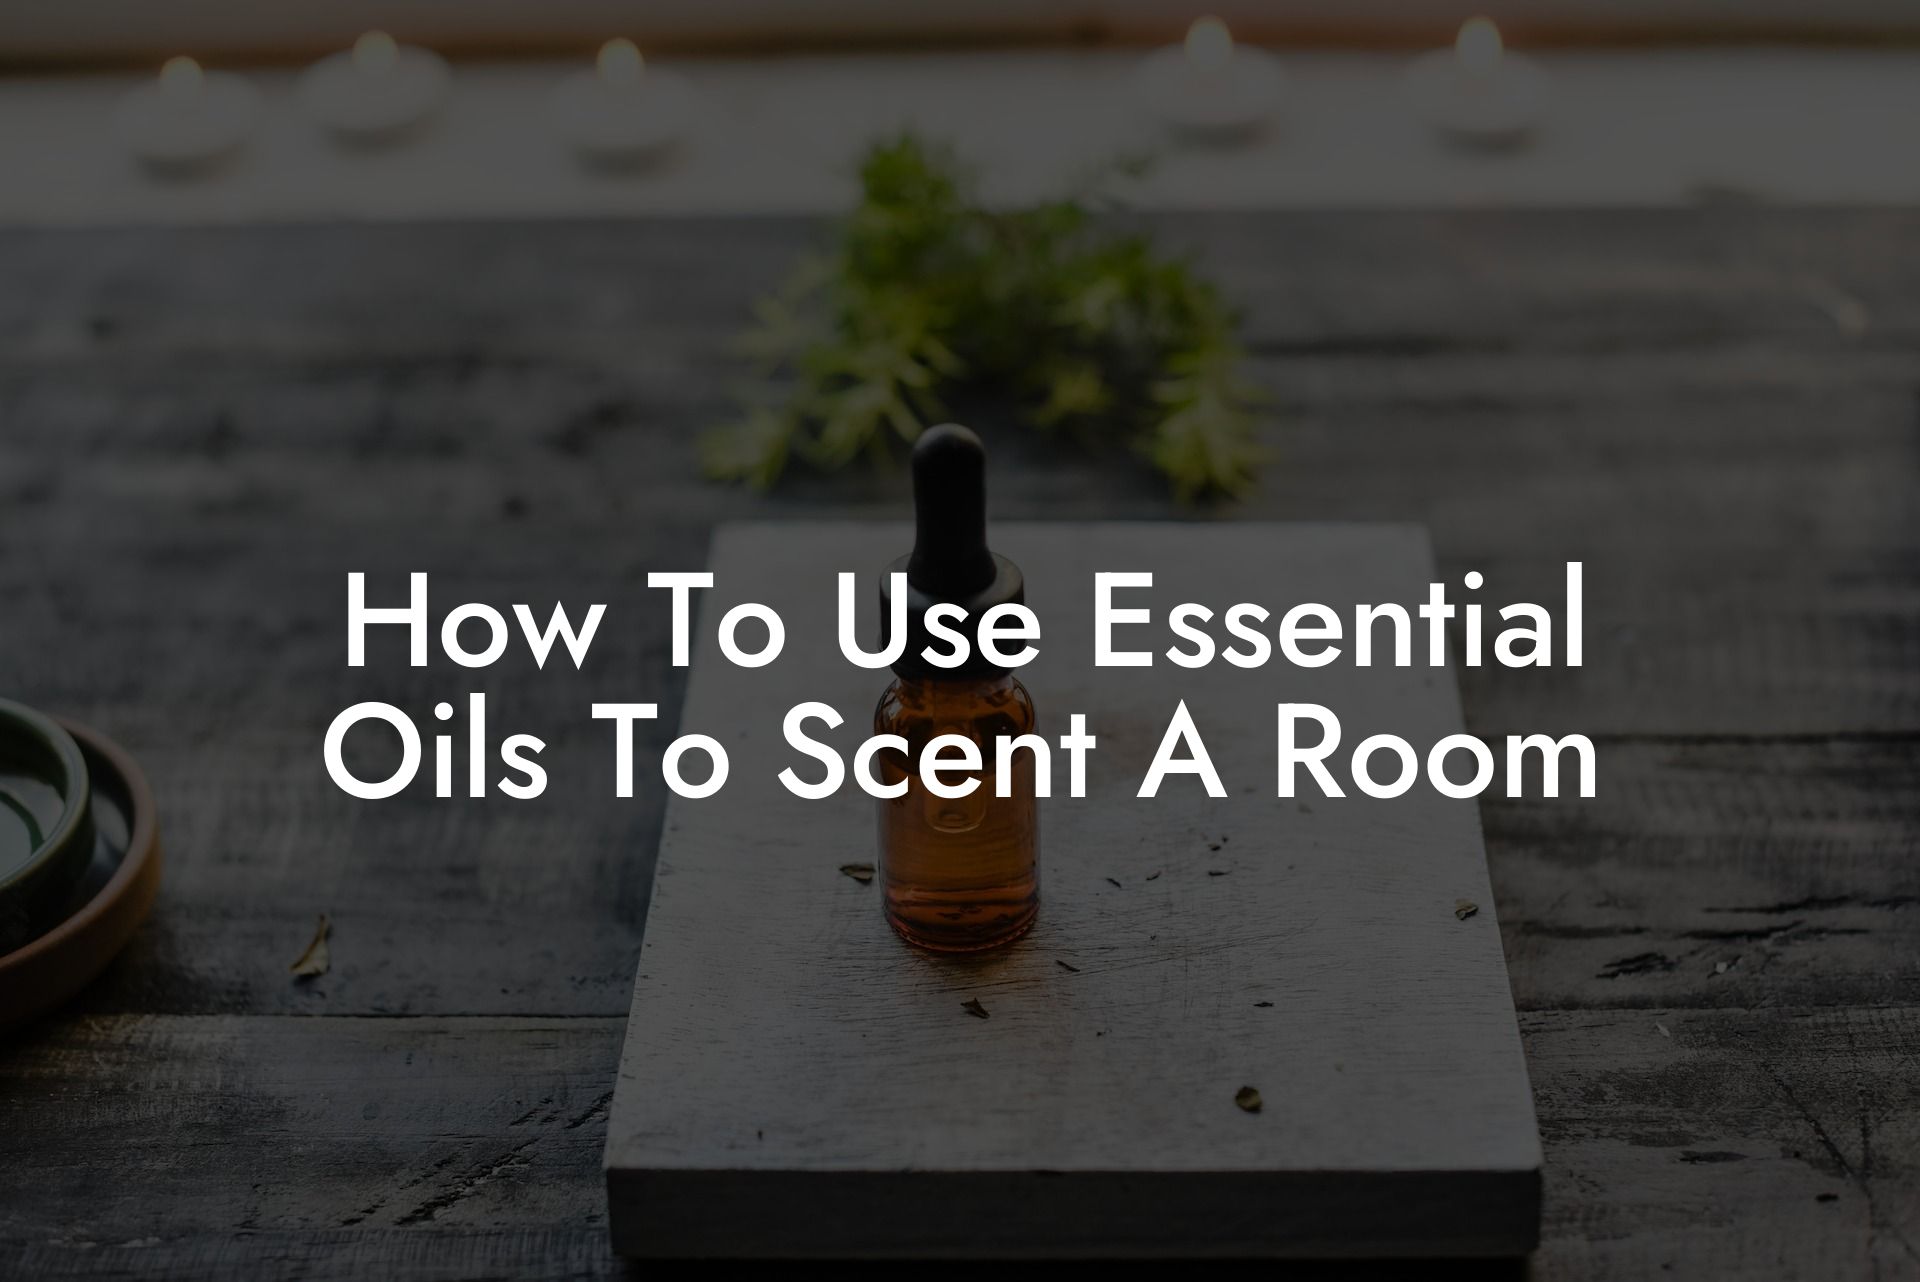 How To Use Essential Oils To Scent A Room